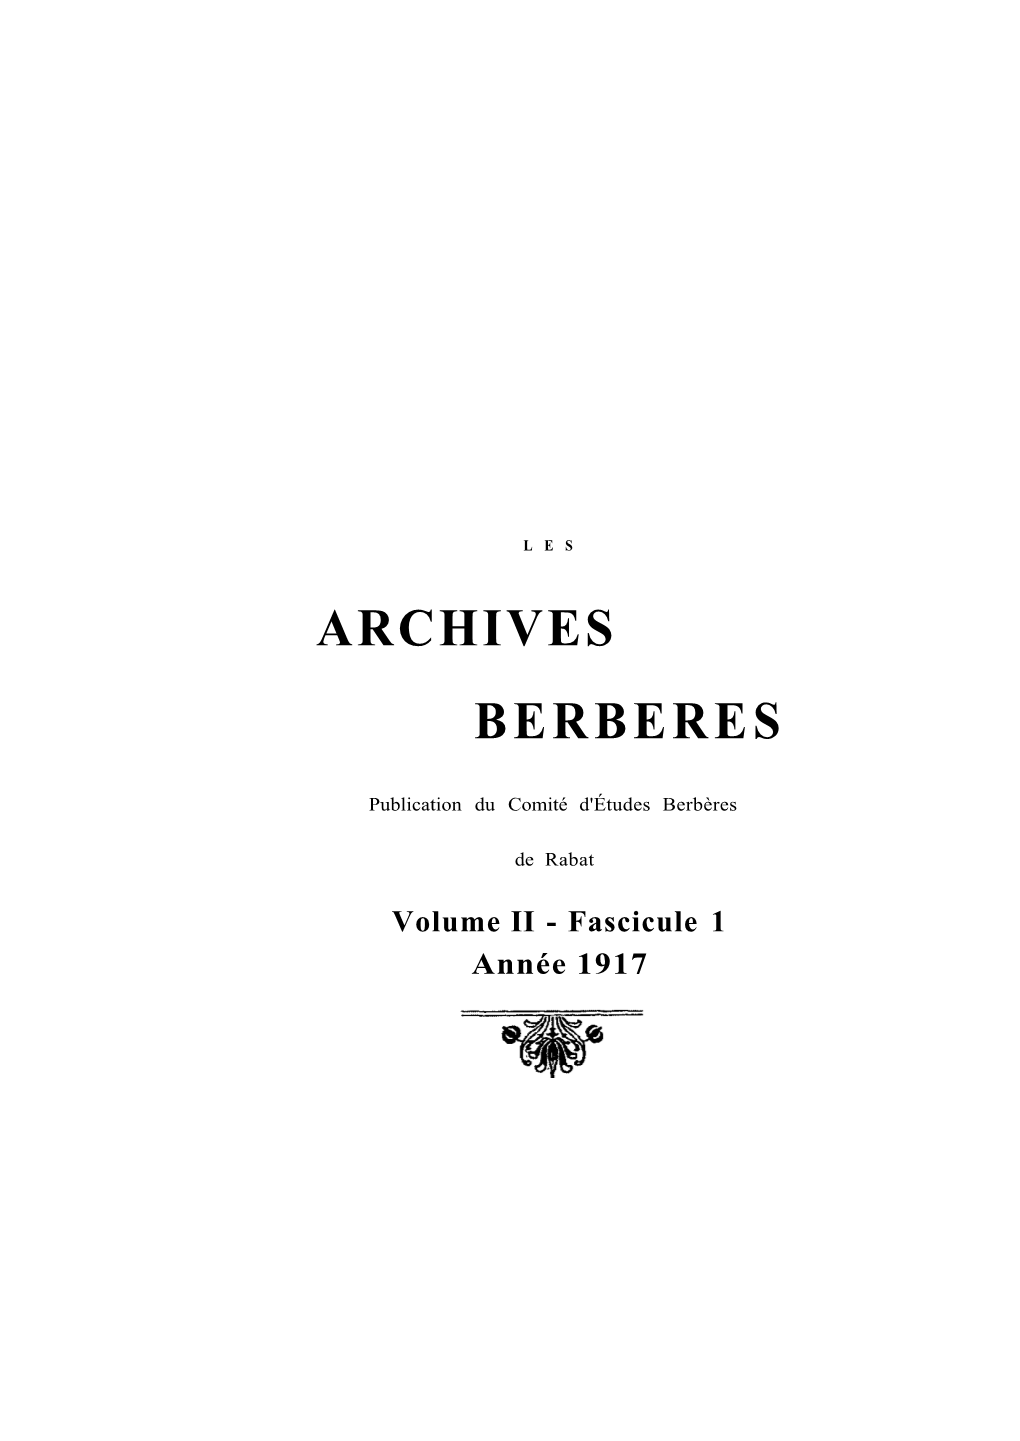 Archives Berberes